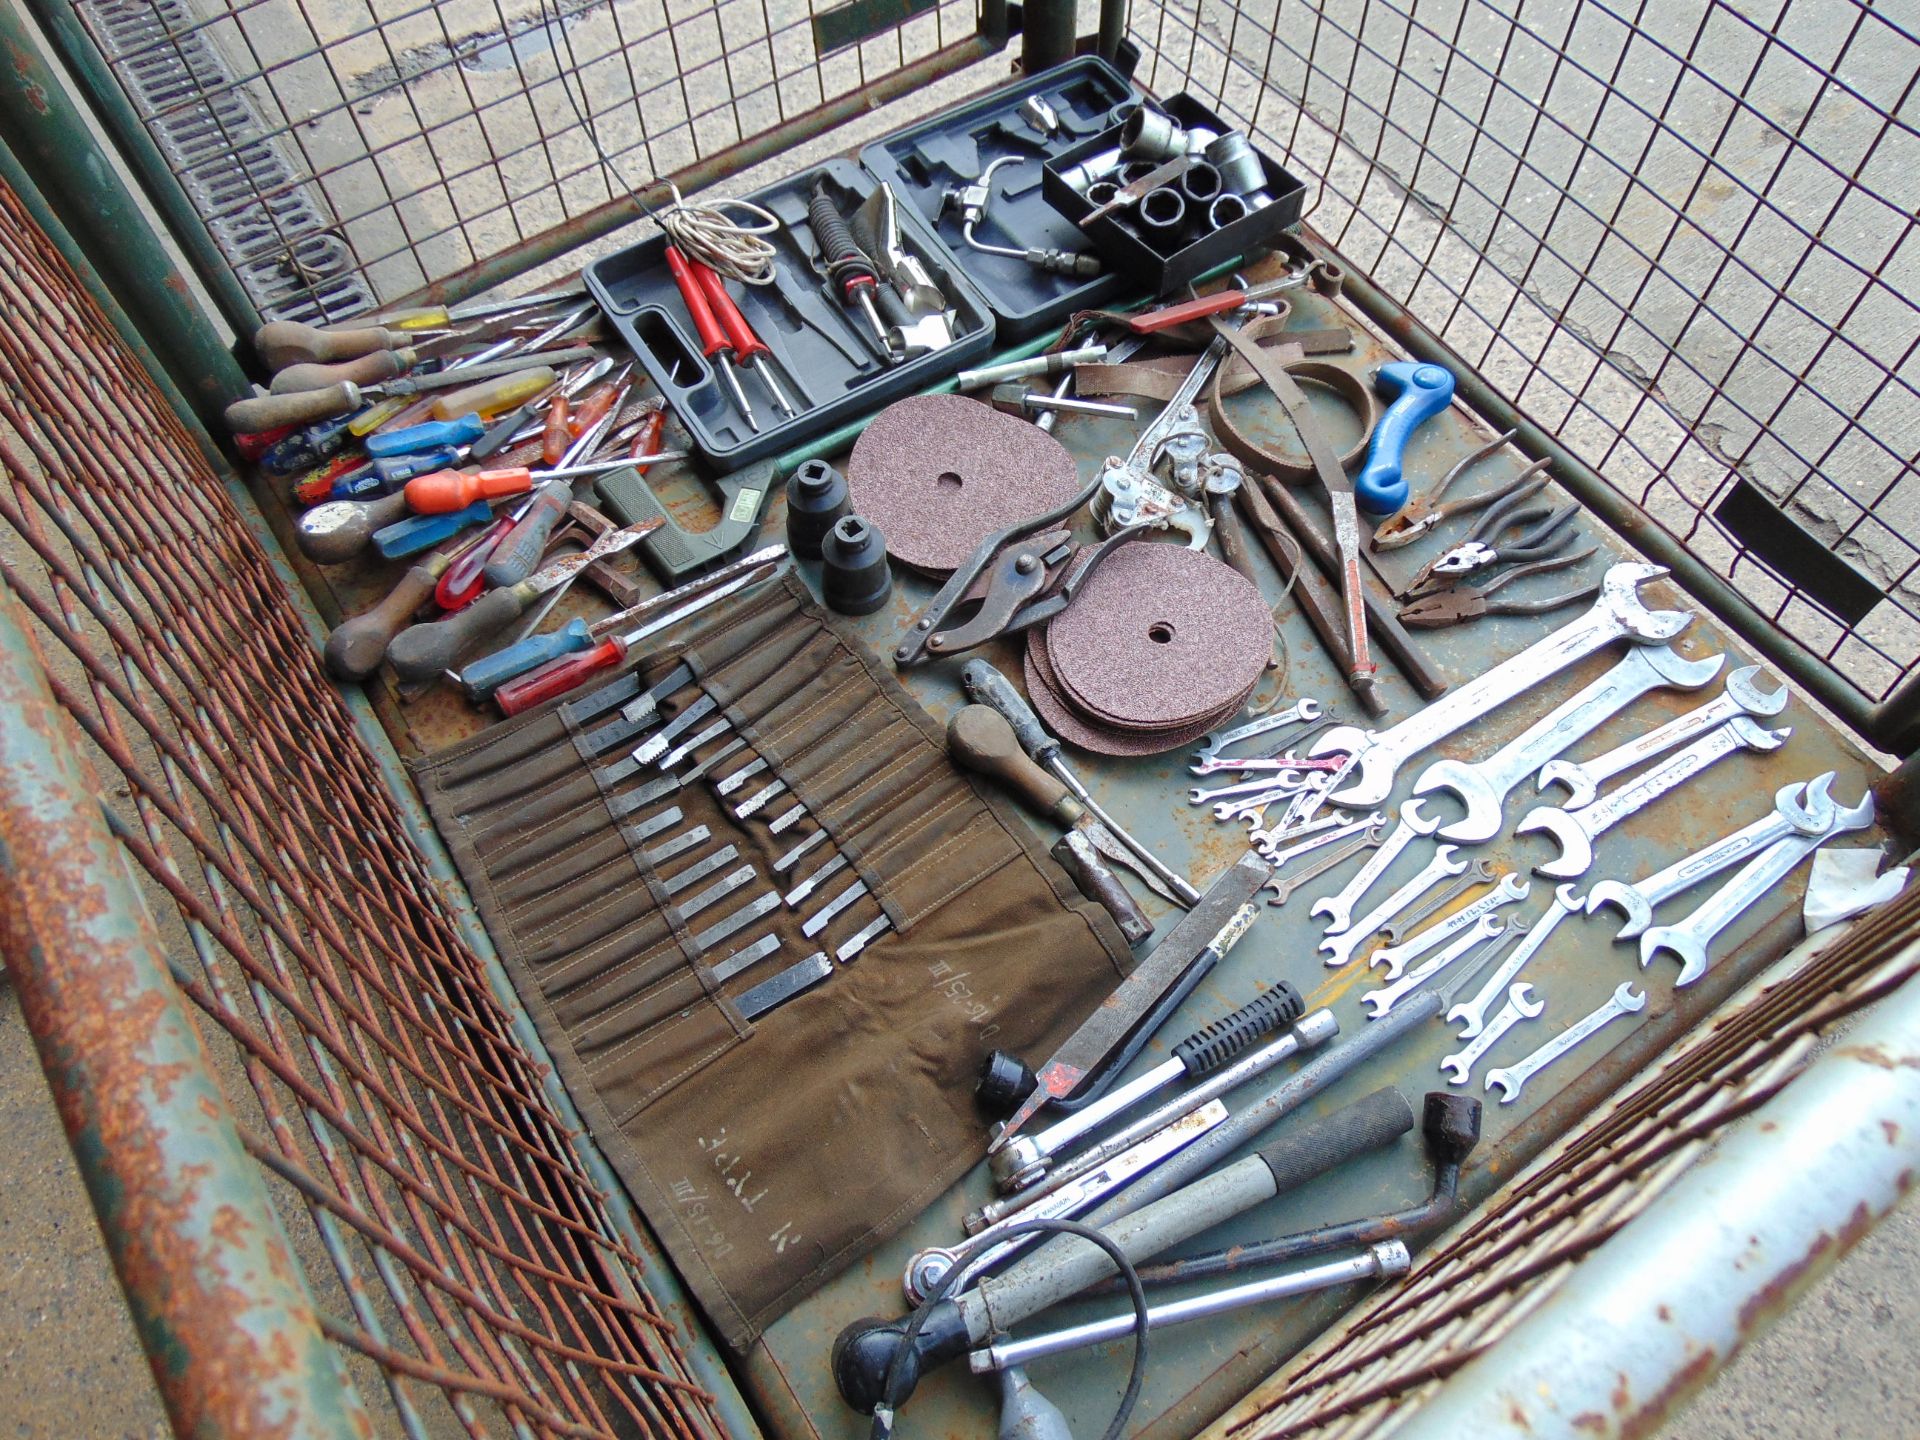 1 x Stillage of Workshop Tools, Spanners, Sockets, Lathe Tools, etc, Approx 120 Items - Image 2 of 9